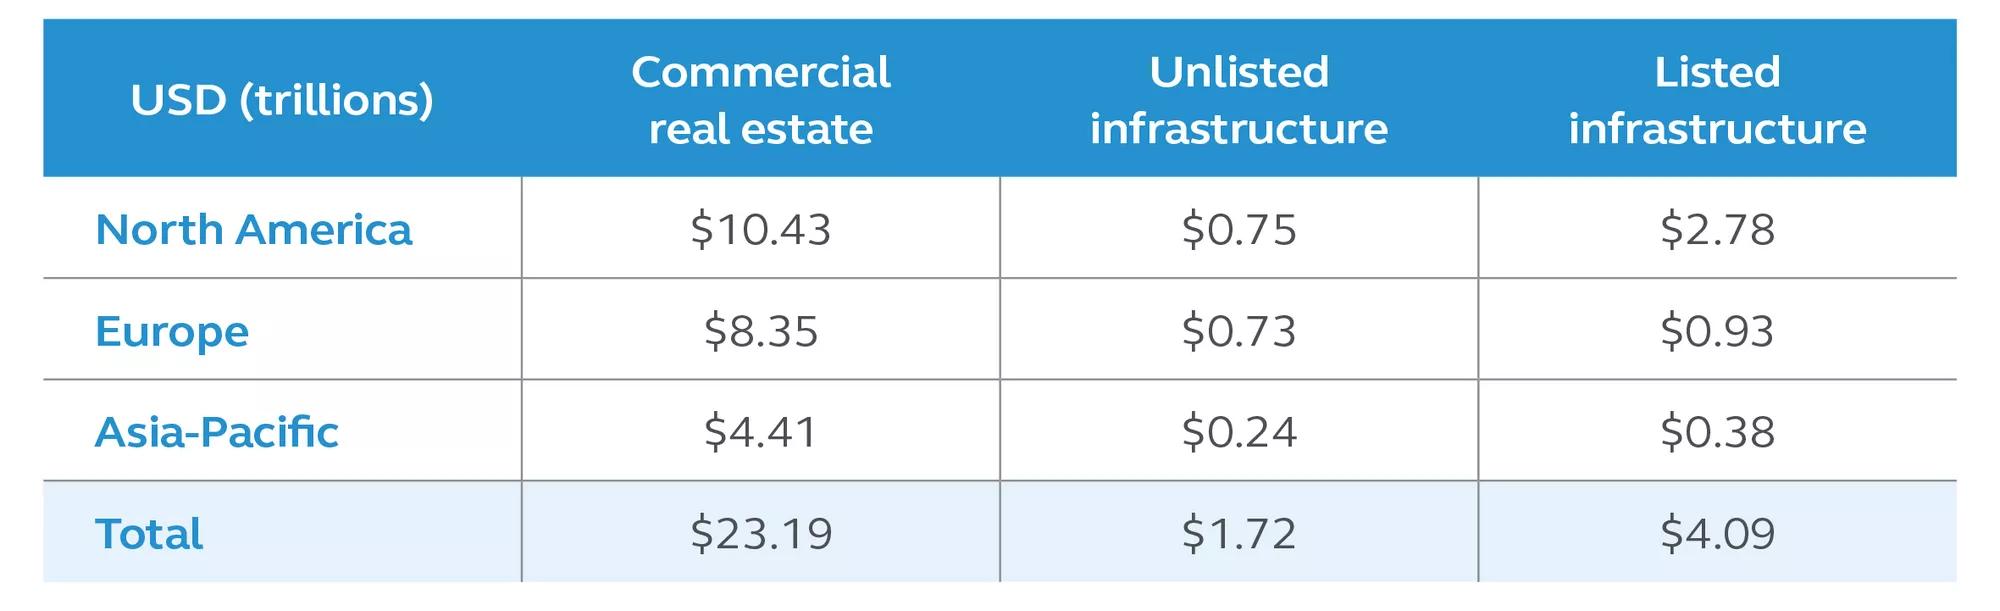 Table displaying the size of investable market for commercial real estate and listed/unlisted infrastructure in USD Trillions